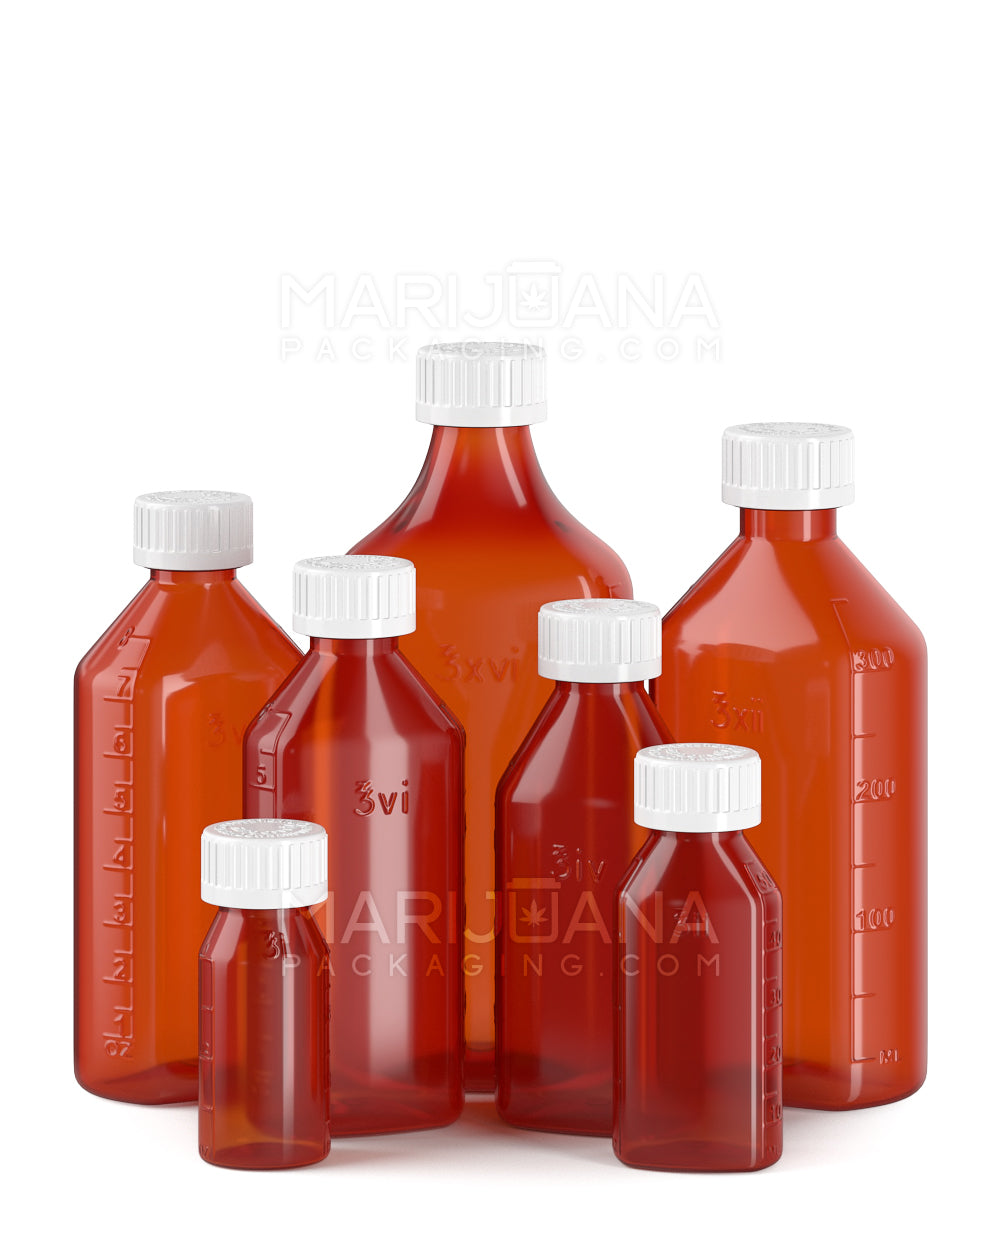 Child Resistant | Push Down & Turn Plastic Syrup Bottles w/ Oral Adapters | 16oz - Amber - 40 Count - 5